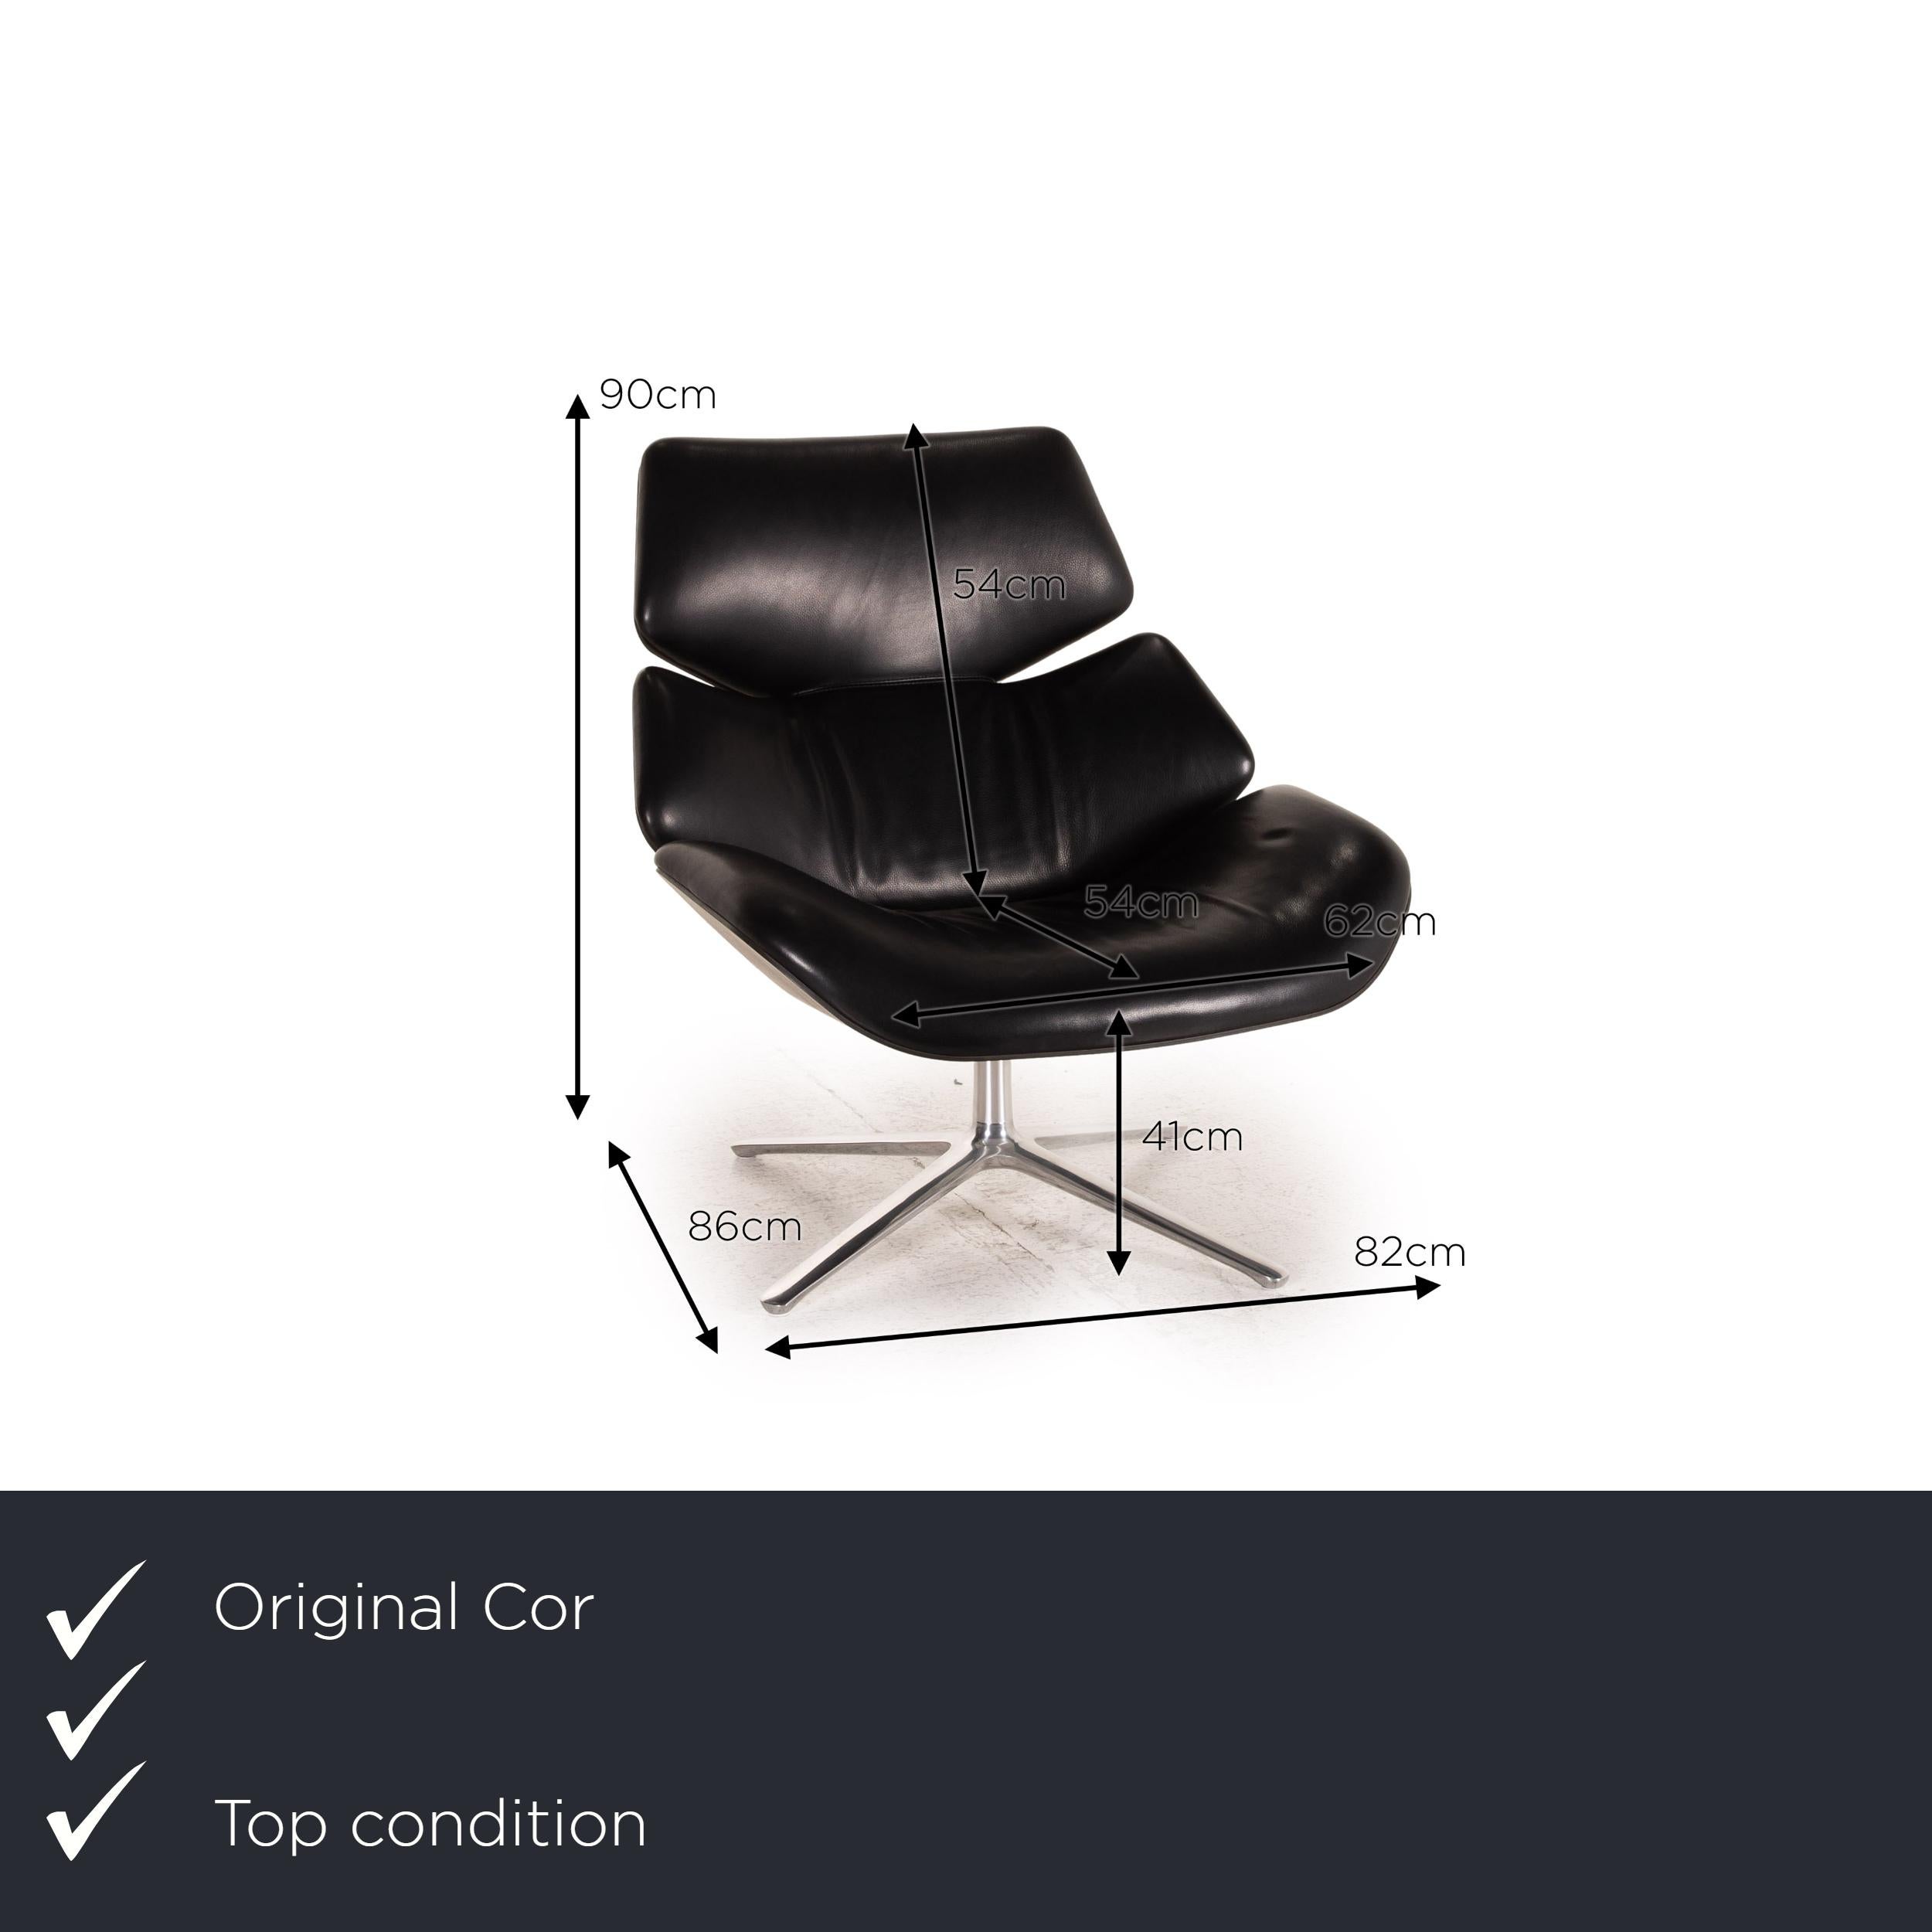 We present to you a COR Shrimp leather armchair black incl. Stool.
 

 Product measurements in centimeters:
 

Depth: 86
Width: 82
Height: 90
Seat height: 41
Seat depth: 54
Seat width: 62
Back height: 54.

 